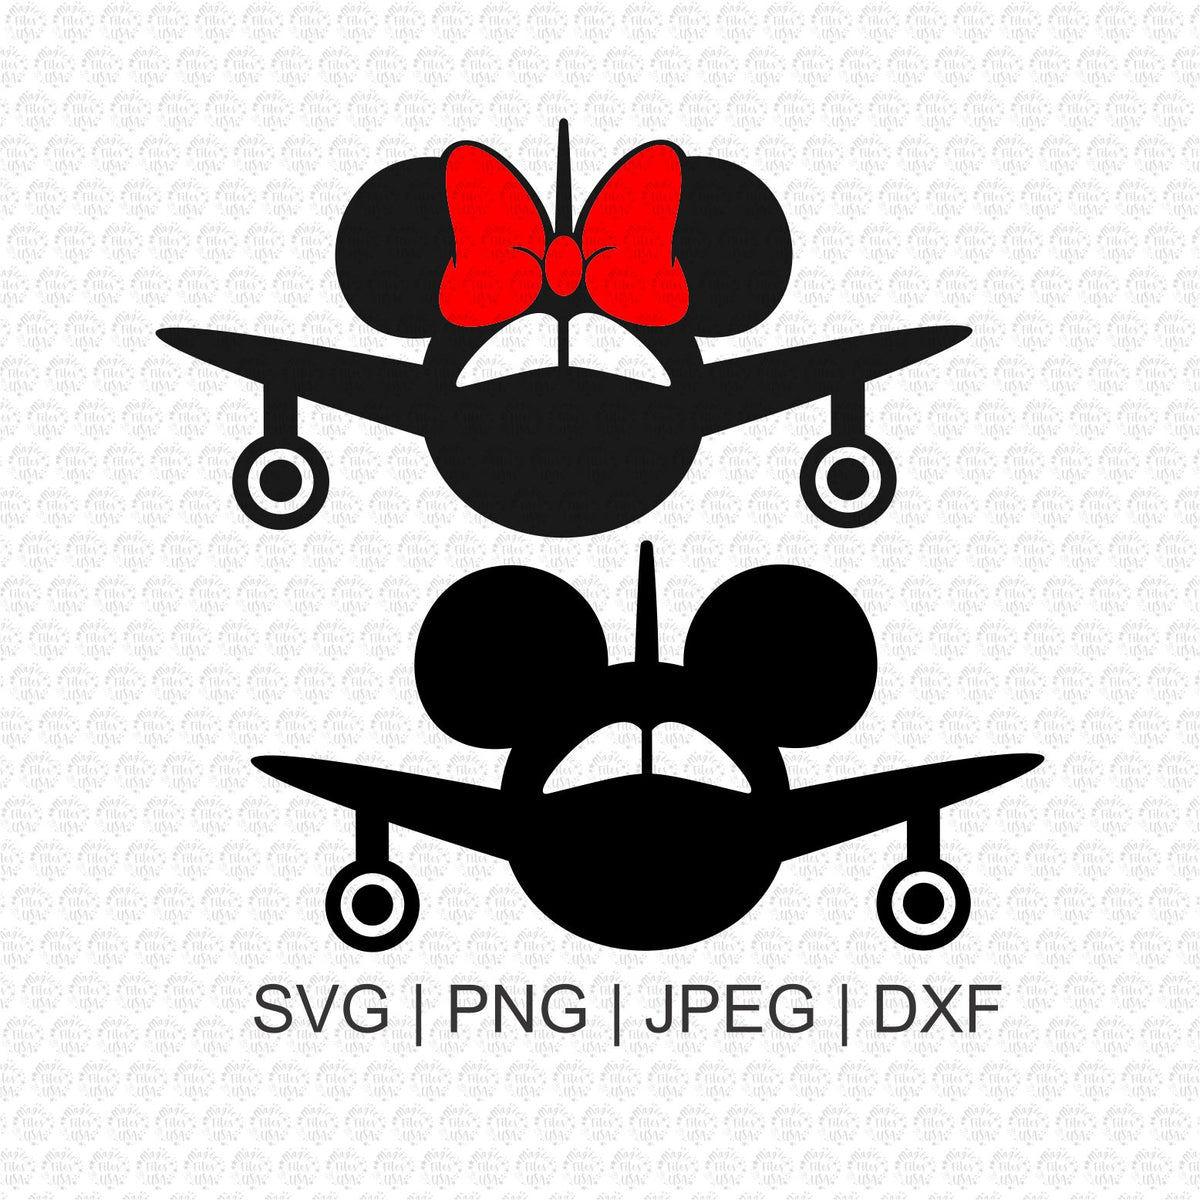 Airplane Minnie Mouse Svg, Airplane Mickey Mouse Svg, Download Files